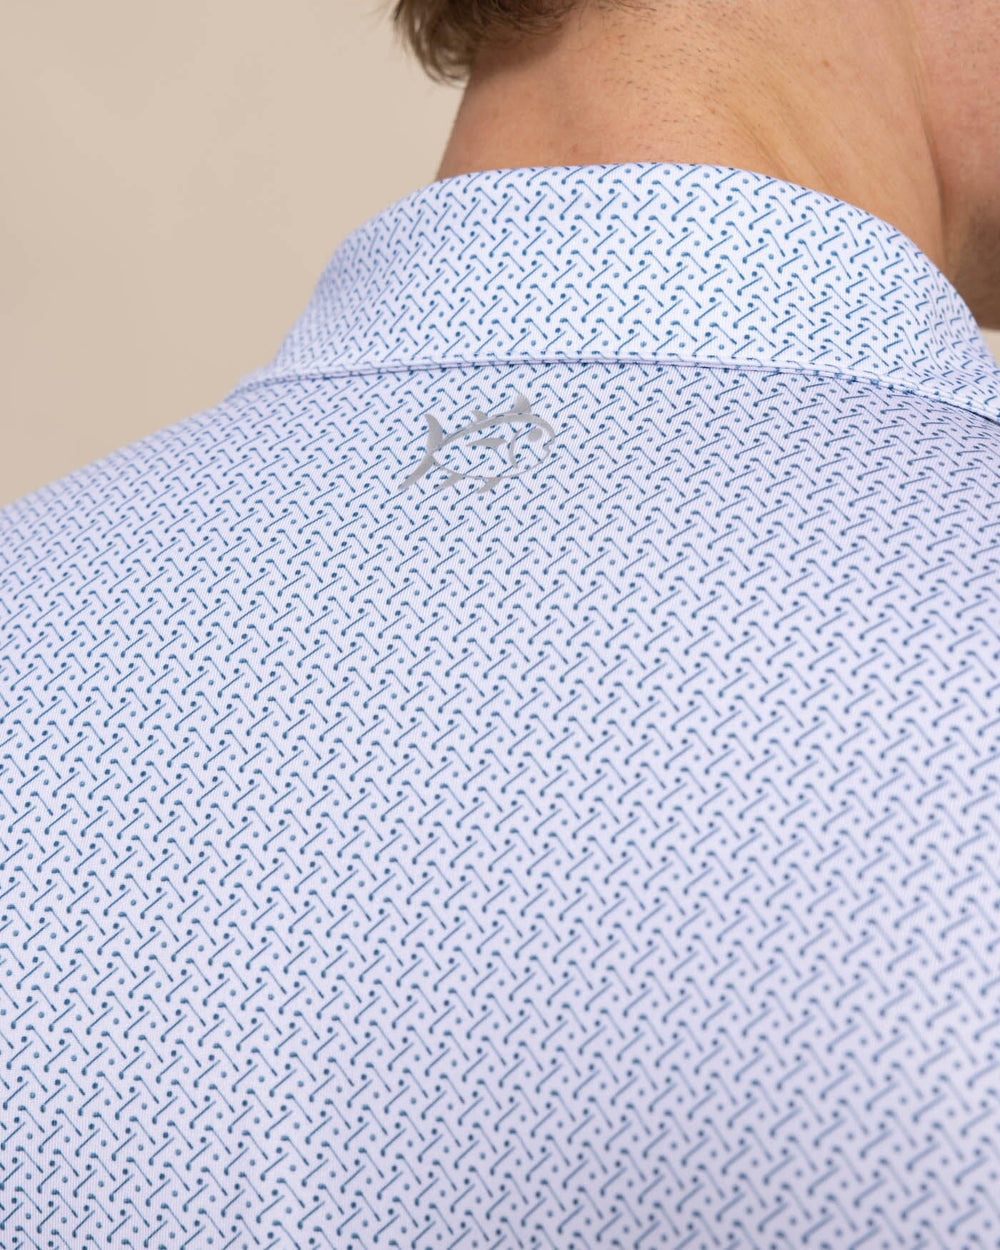 The detail view of the Southern Tide Driver Clubbin It Printed Polo by Southern Tide - Classic White